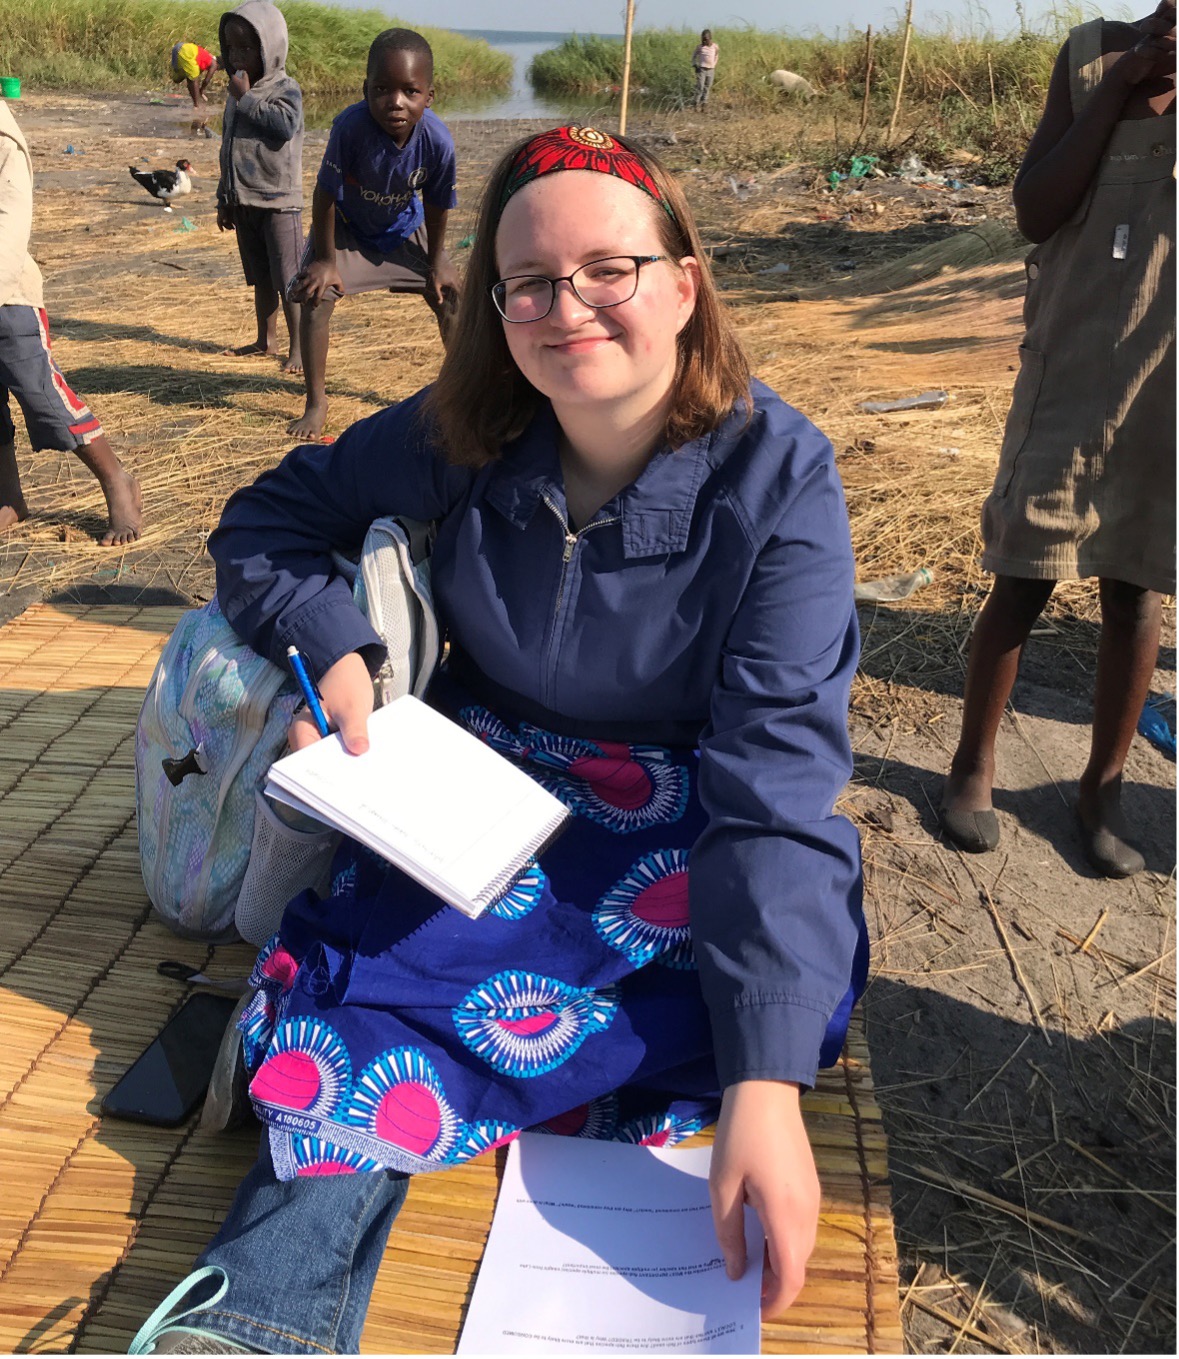 While serving as an undergraduate research assistant on the Fish4Zambia project in 2019, Laura Ingouf prepares for a women’s focus group on an island in Lake Bangweulu, Zambia.